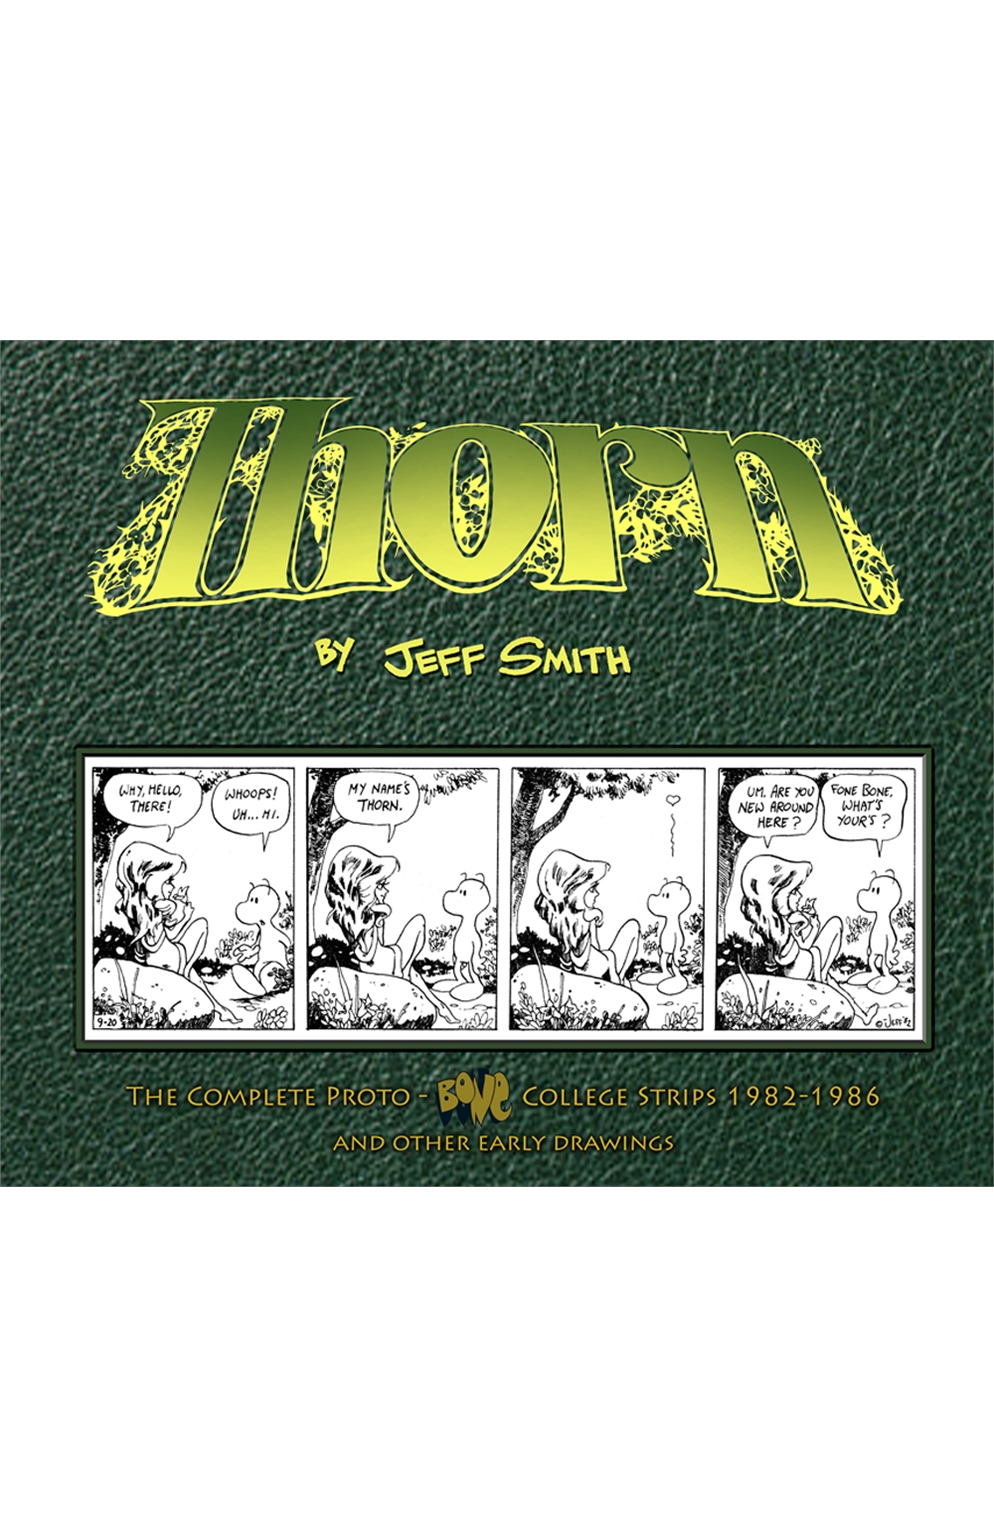 Thorn: The Complete Proto-Bone College Strips 1982 - 1986 And Other Early Drawings (Kickstarter Edit